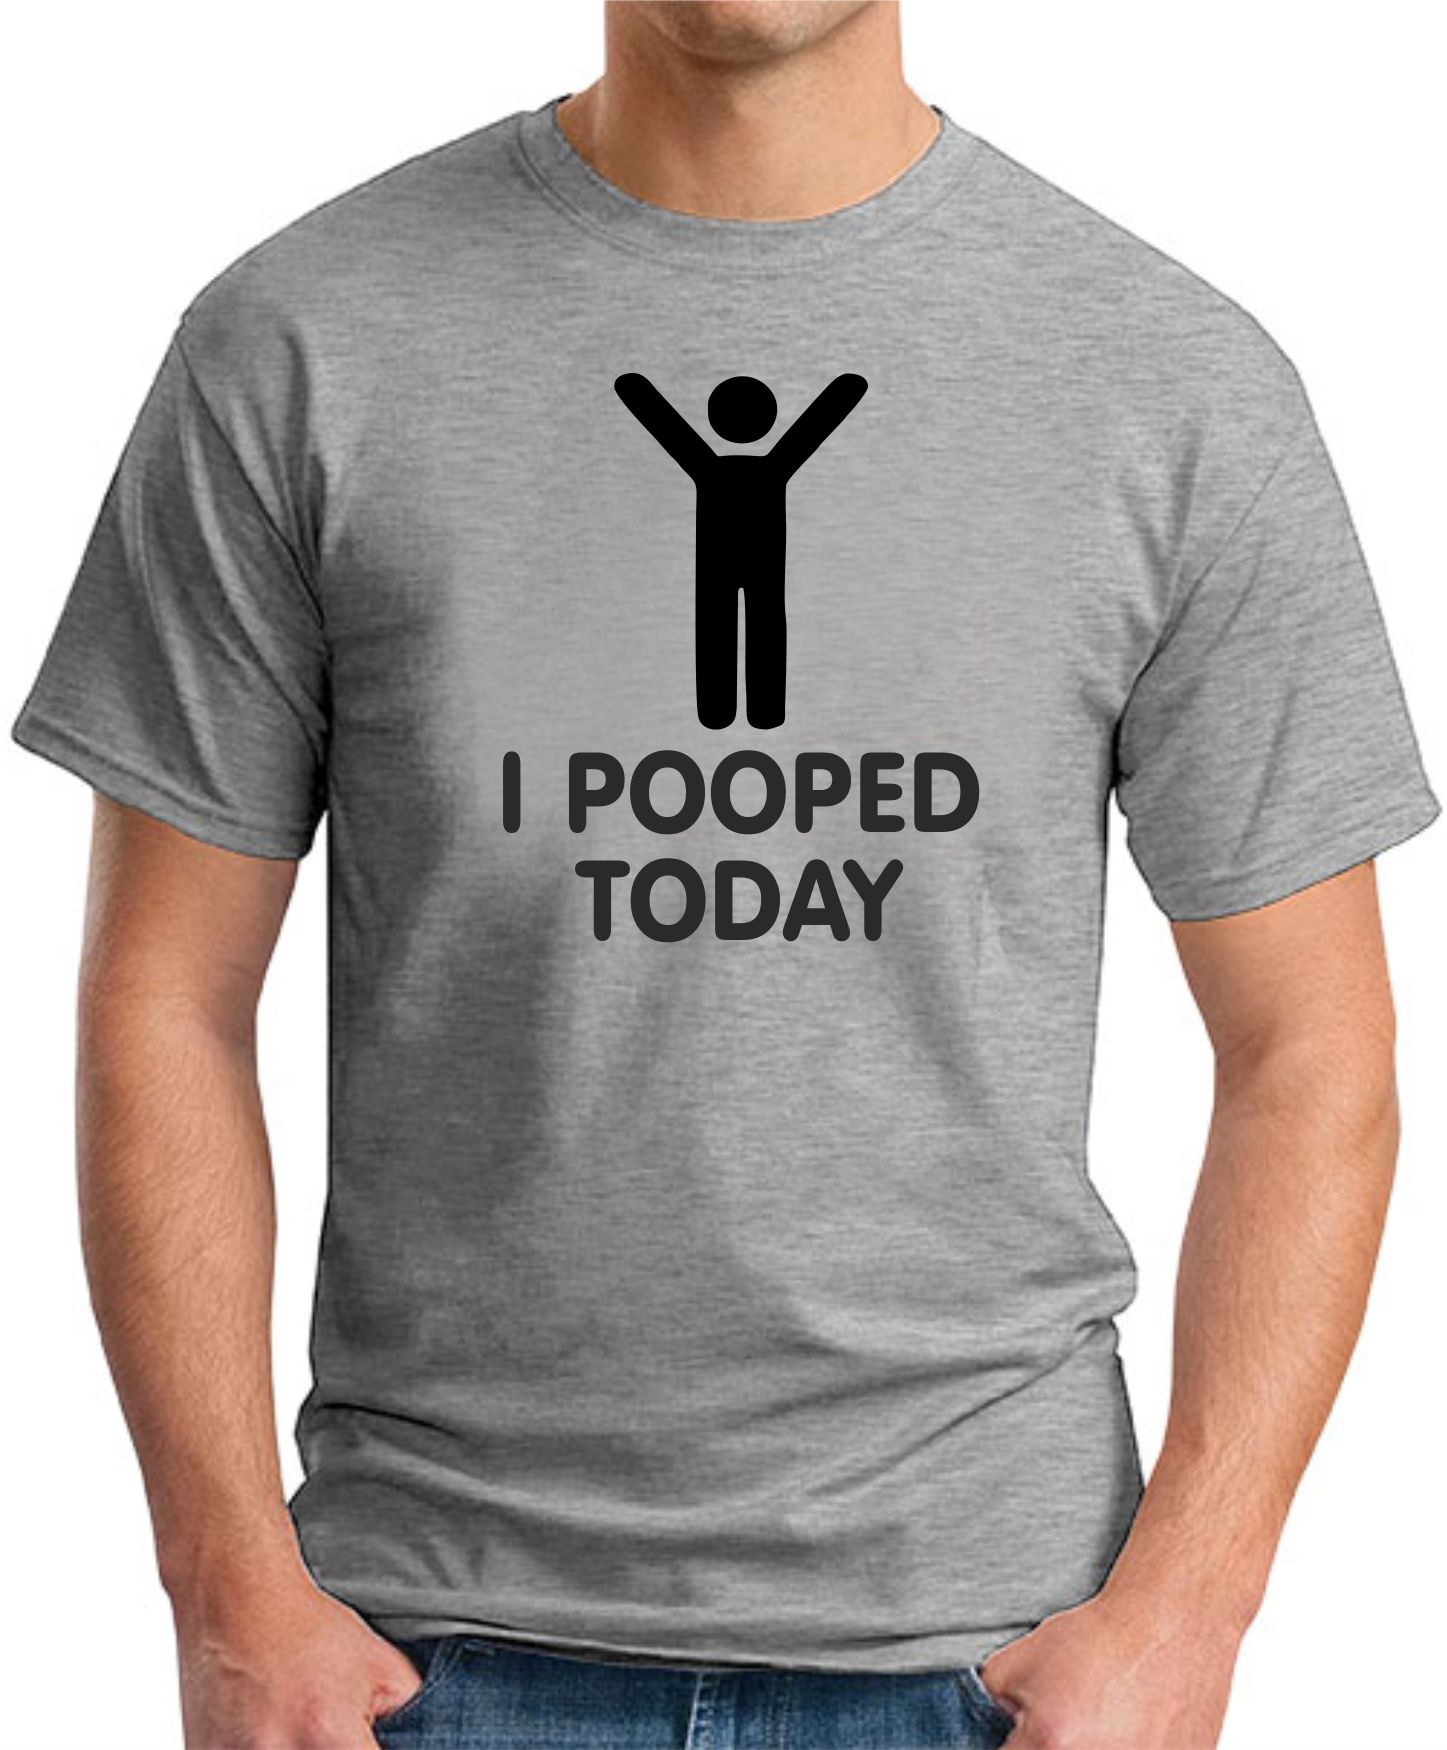 I-POOPED-TODAY-a.jpg